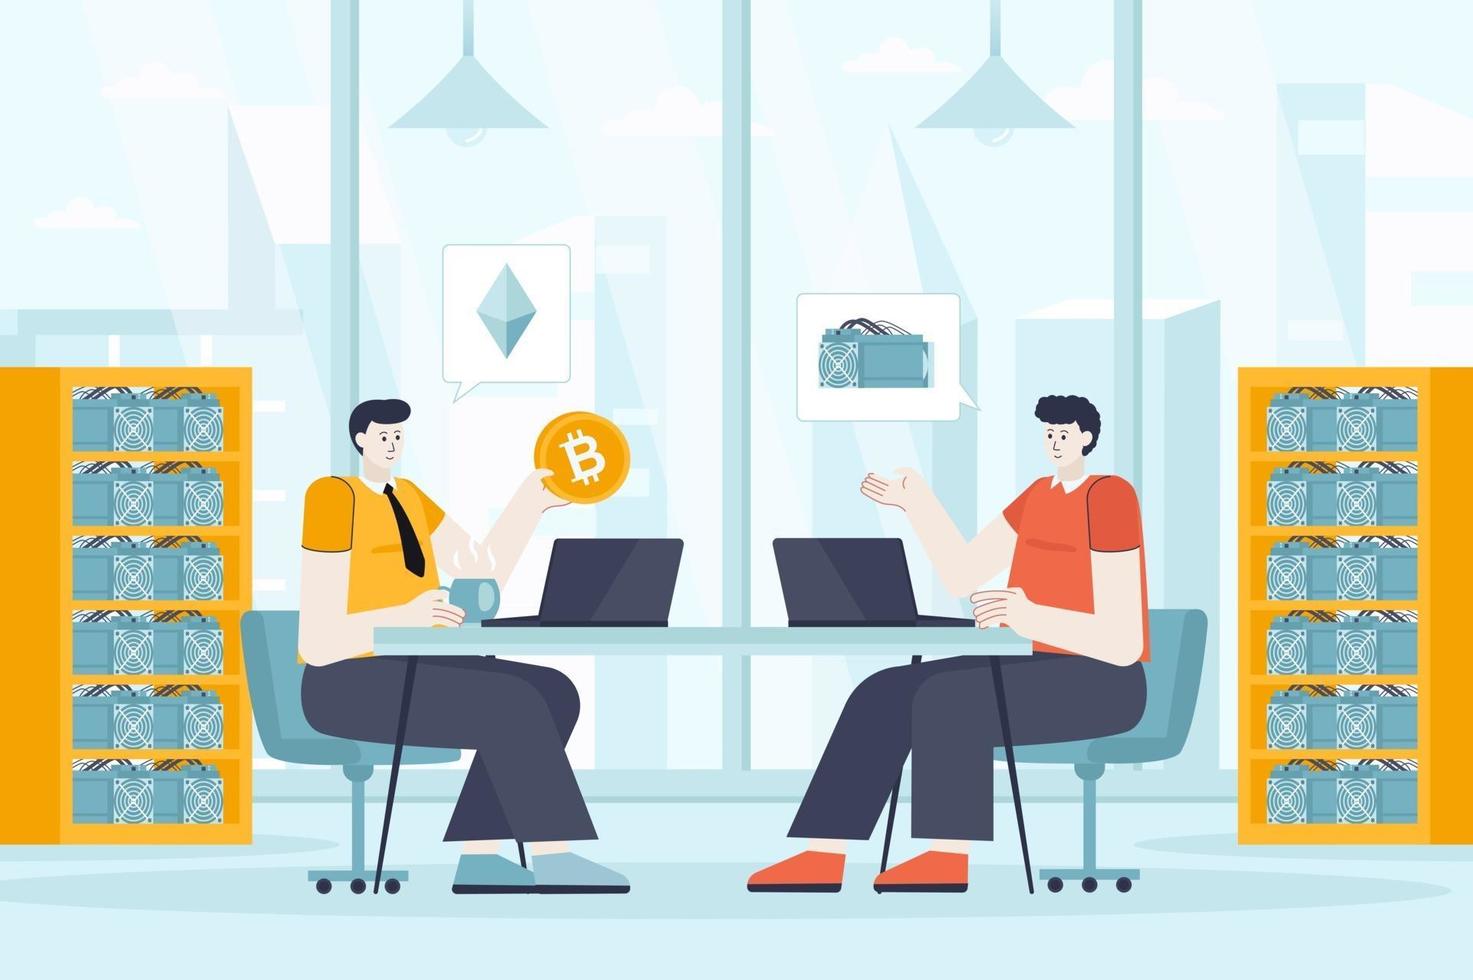 Cryptocurrency concept in flat design vector illustration